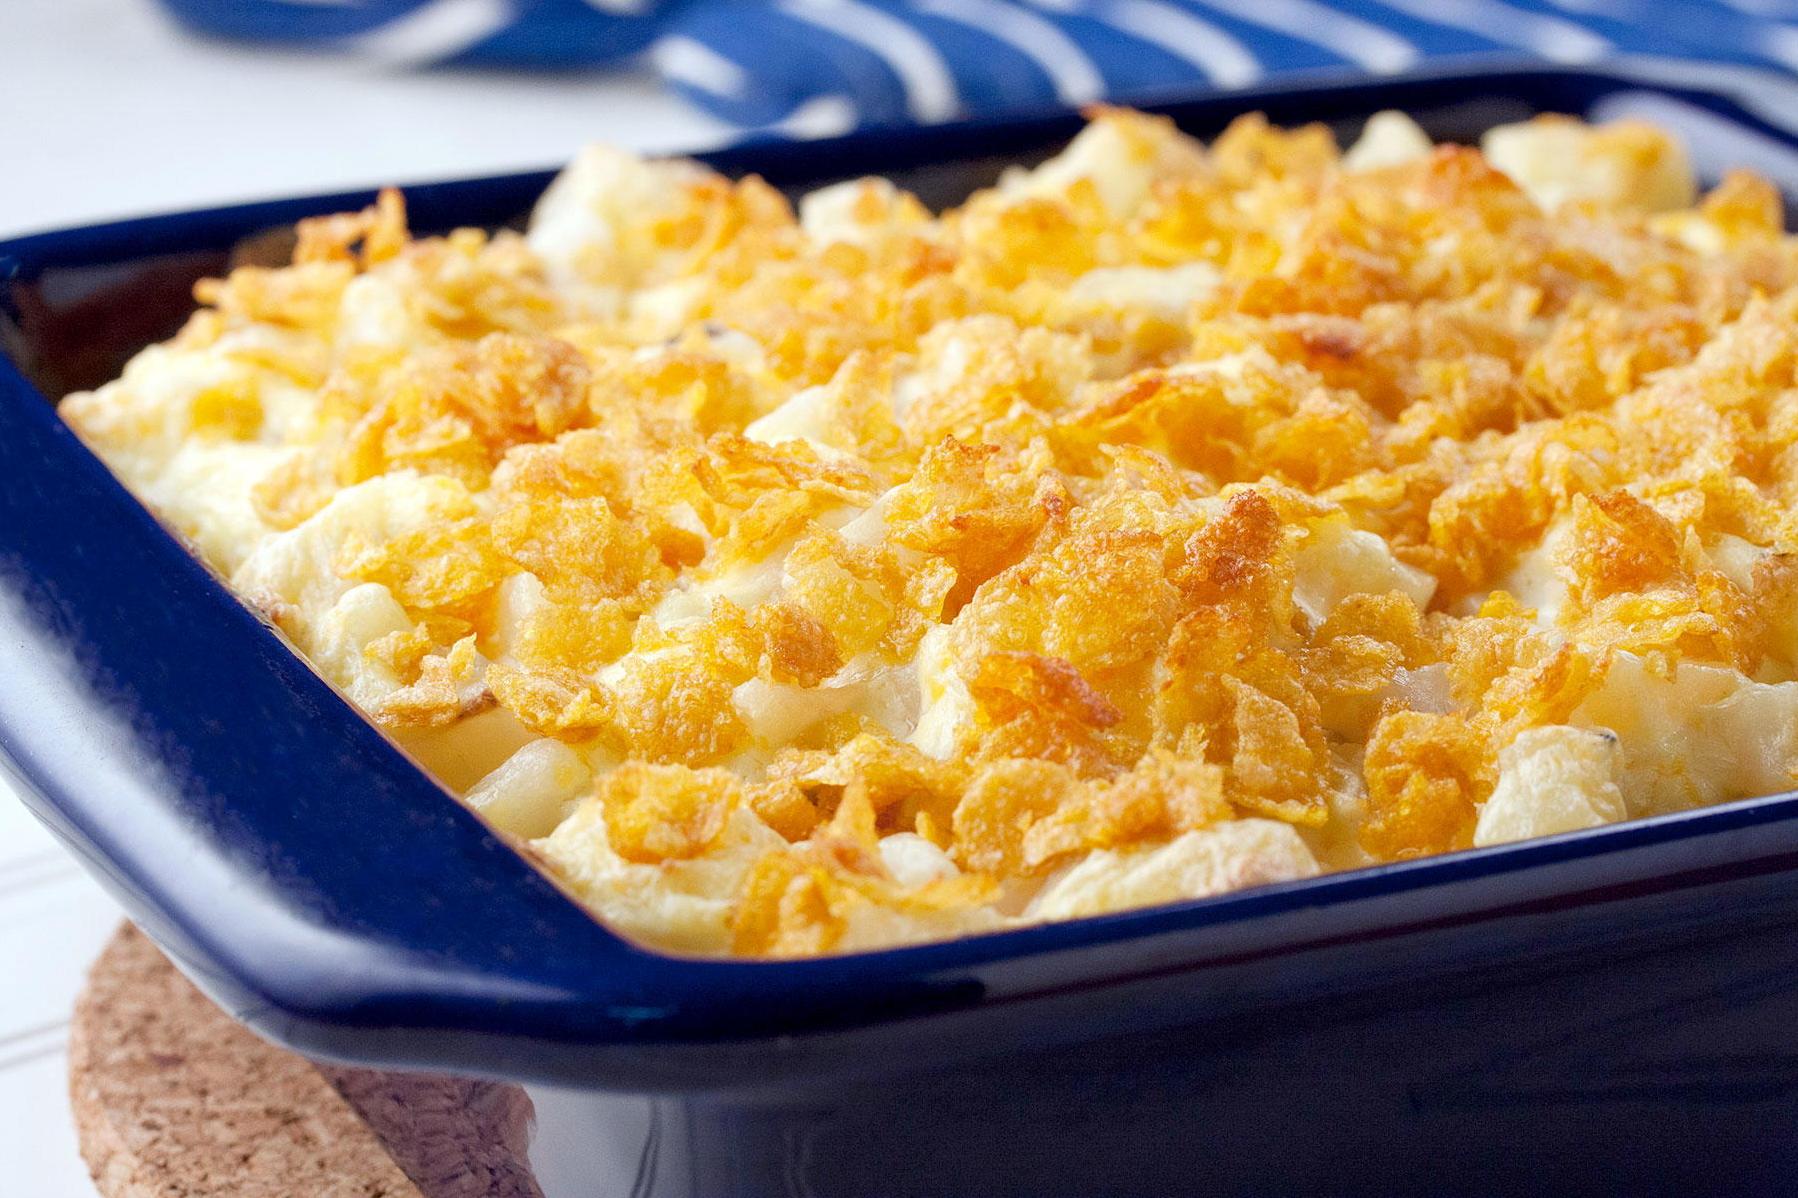  One mouthful of the creamy and cheesy potatoes and you'll feel like you're right at home in the South.